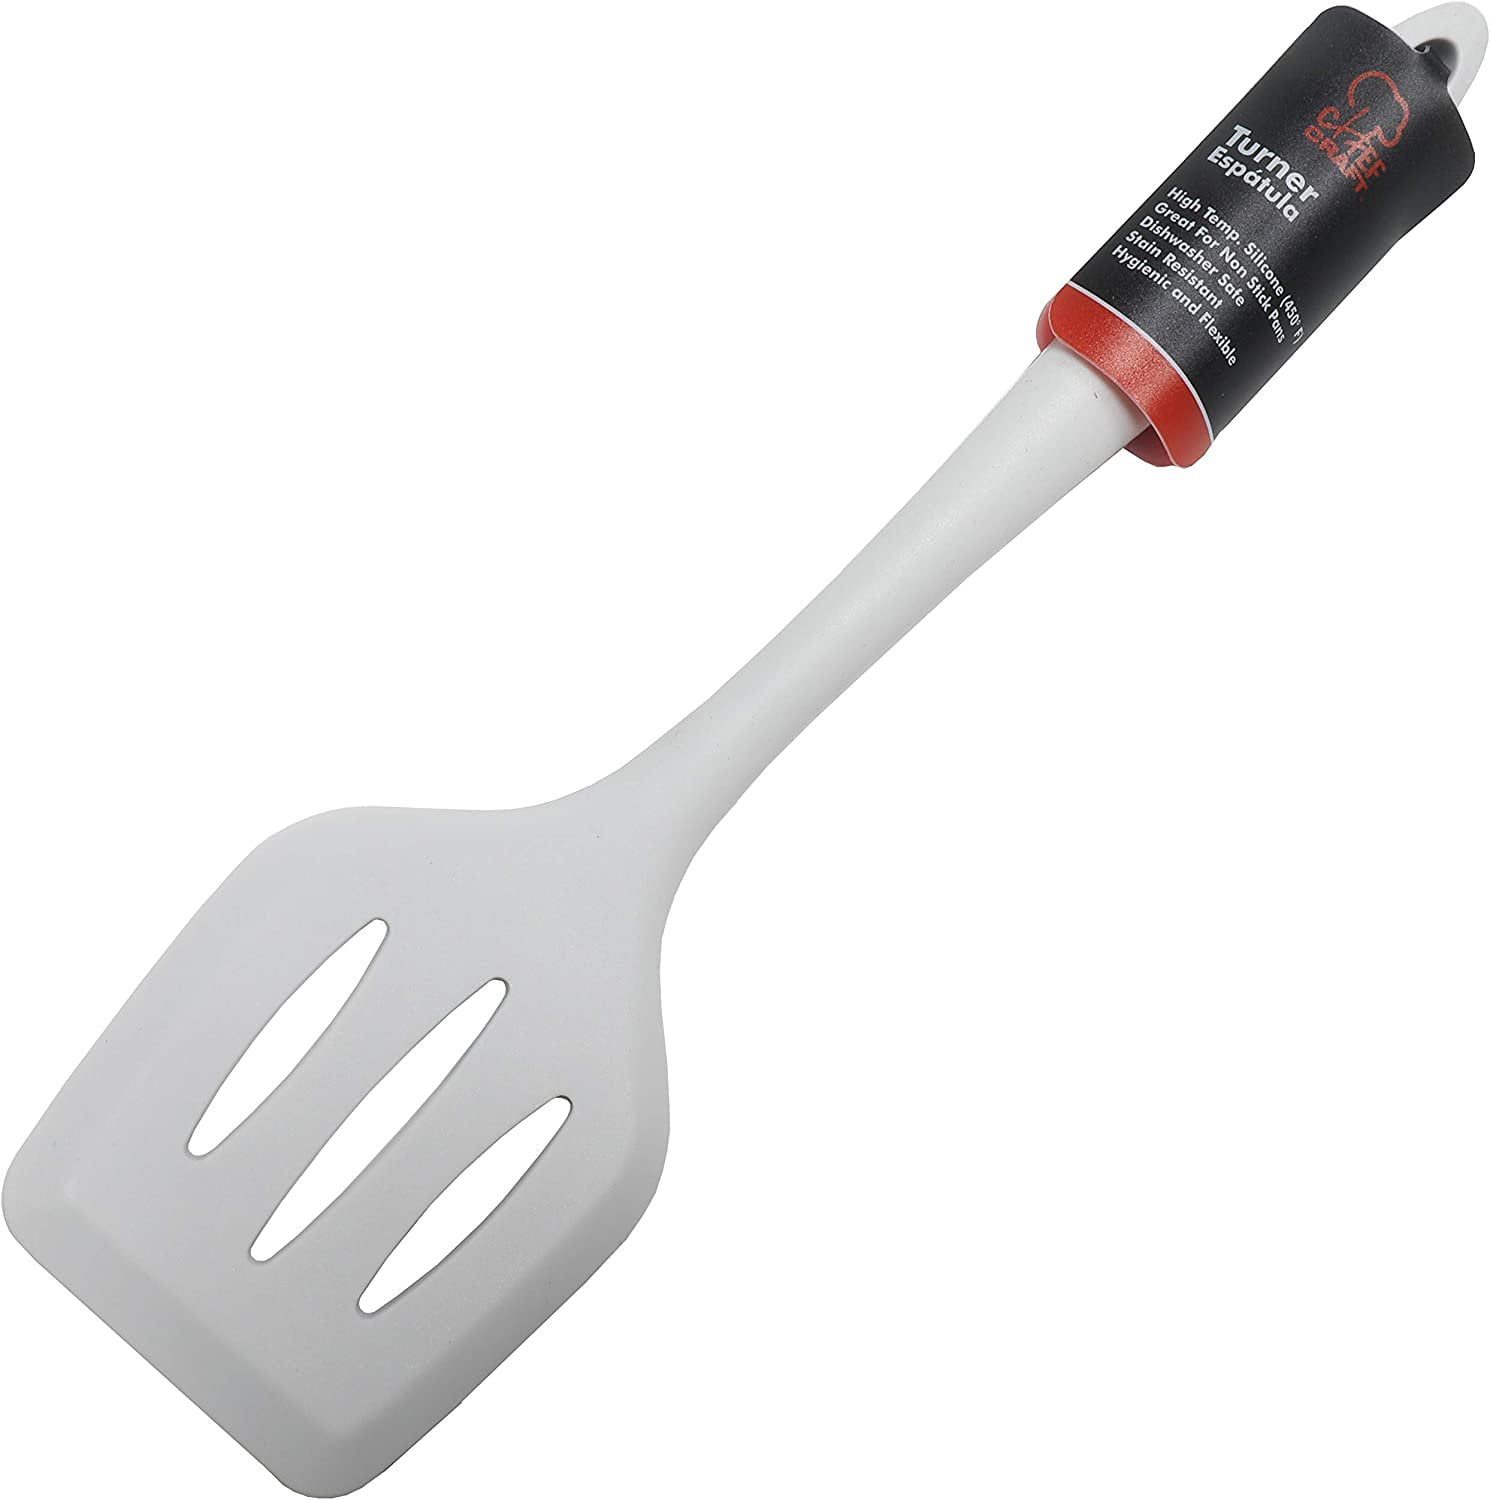 Professional Flexible Stainless Steel Slotted Spatula Turner, 14-Inch –  TOP-KITCHEN